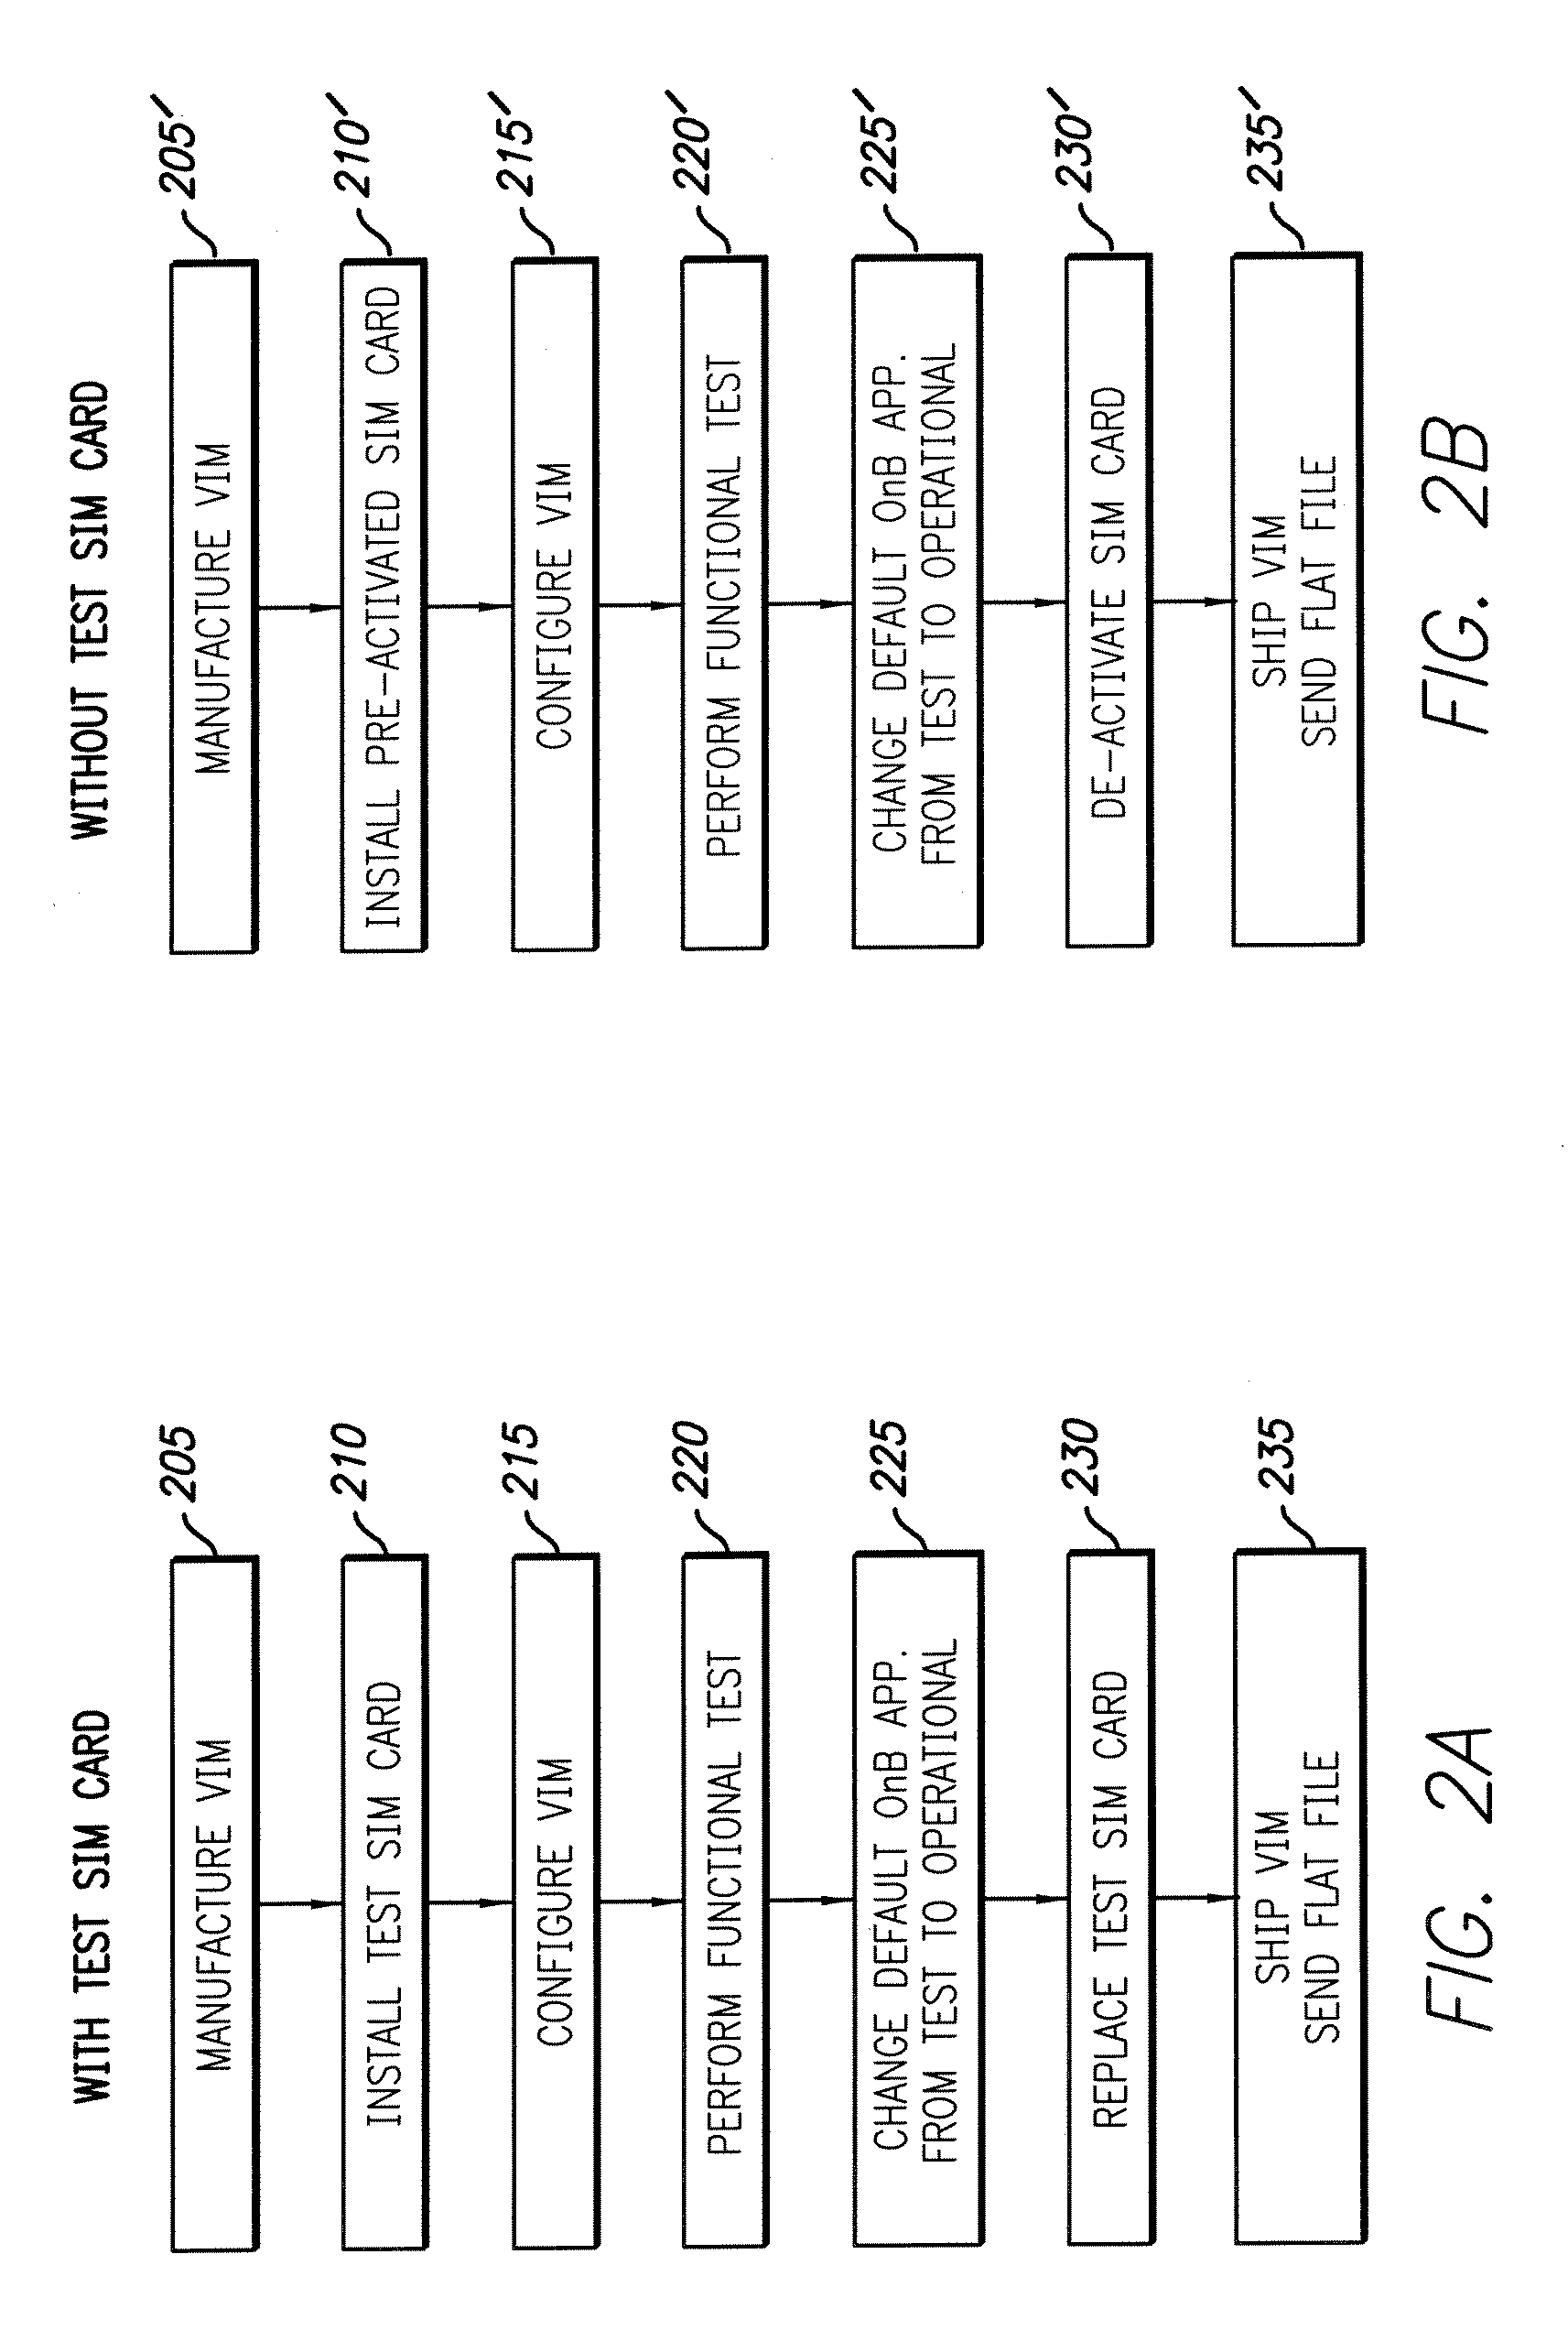 System and method for provisioning a vehicle interface module